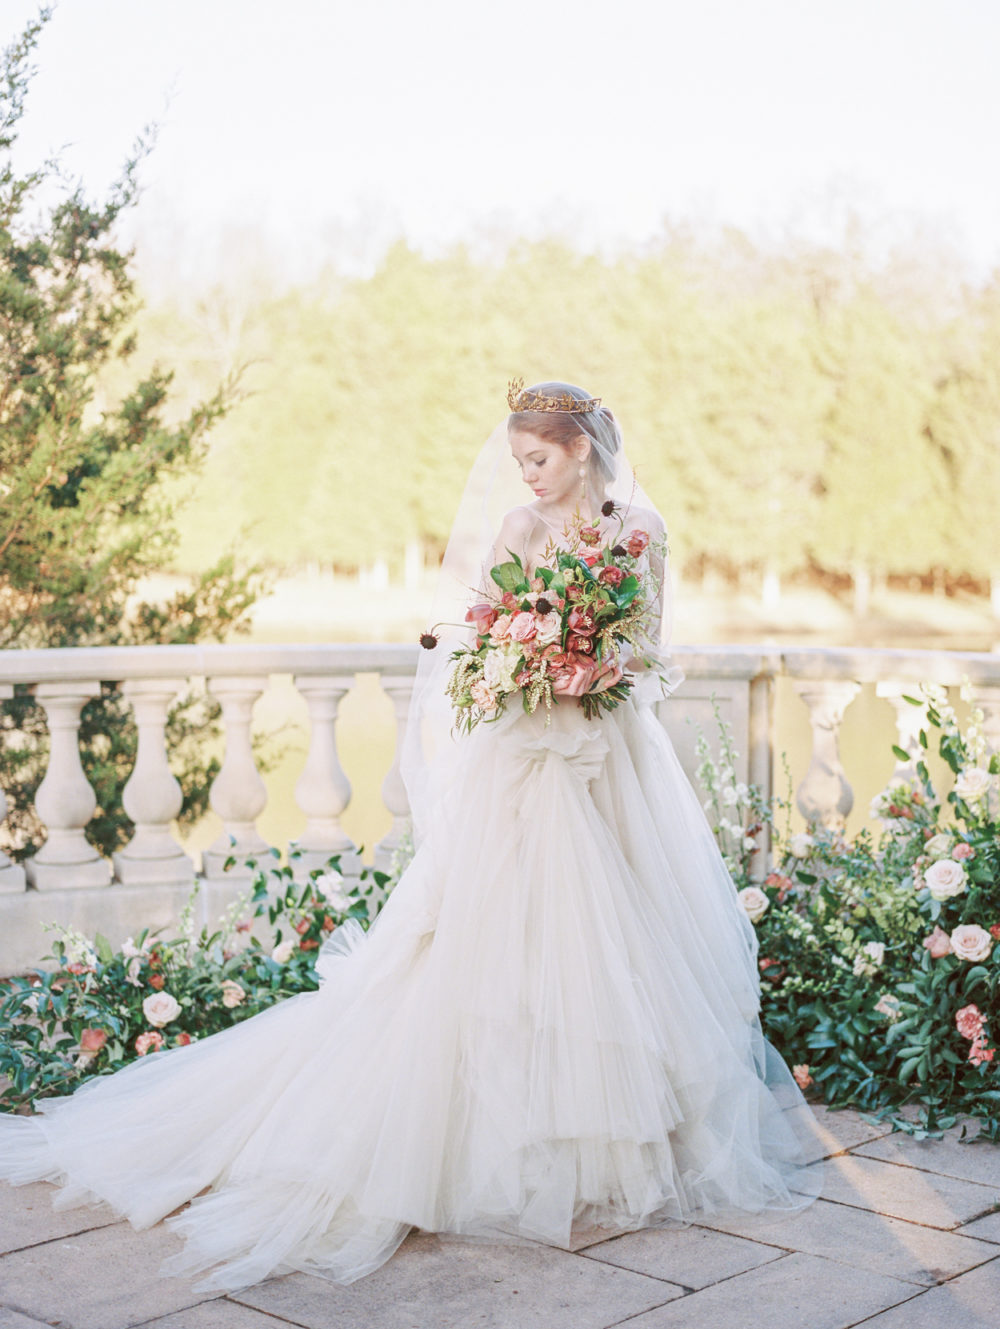 Great Marsh Estate winter wedding editorial with muted tones